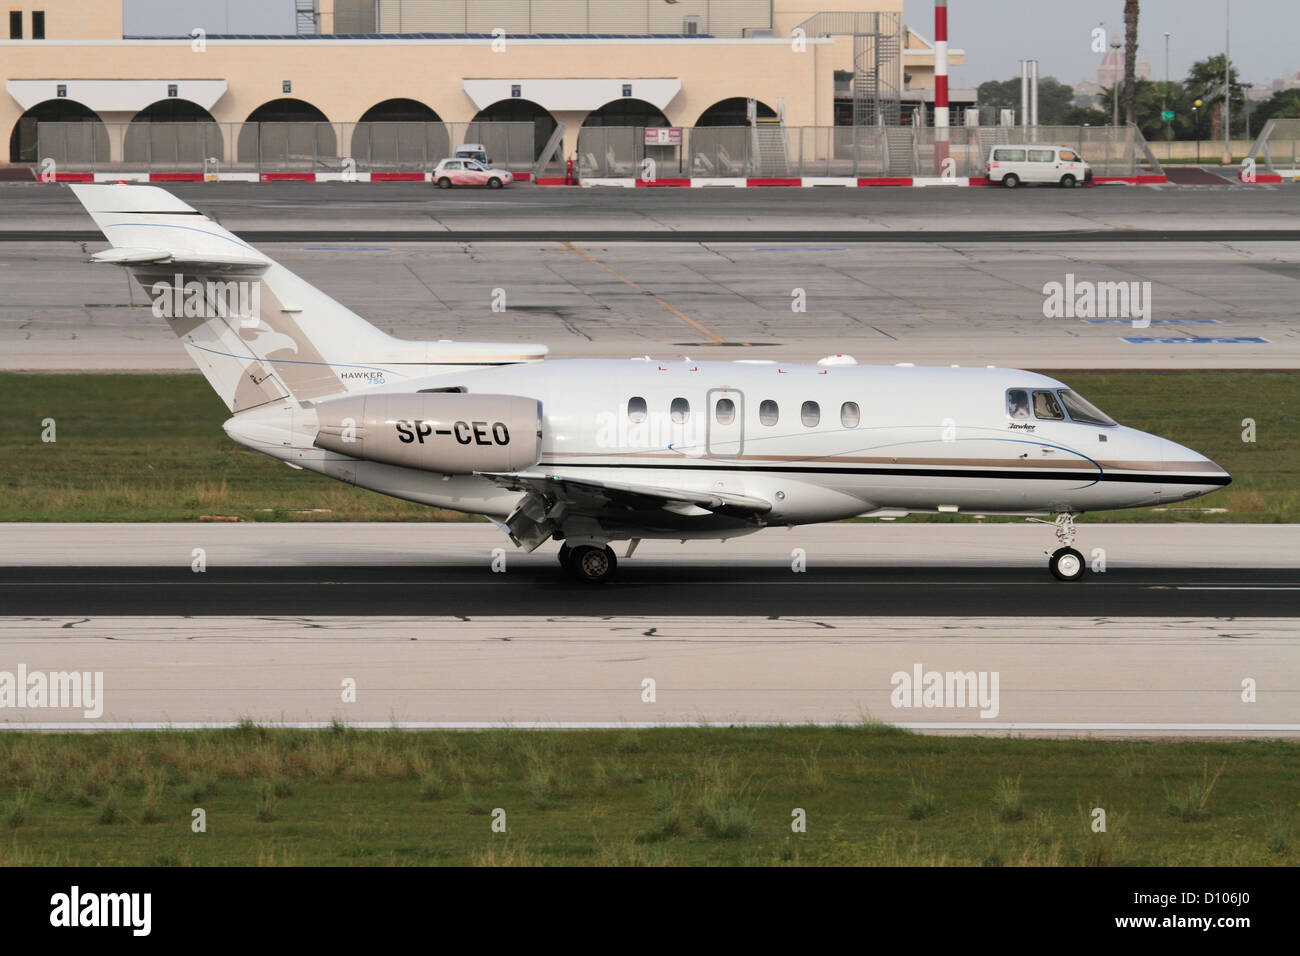 Hawker 750 private jet on arrival in Malta. Note the Hawker logo on the tail. Stock Photo